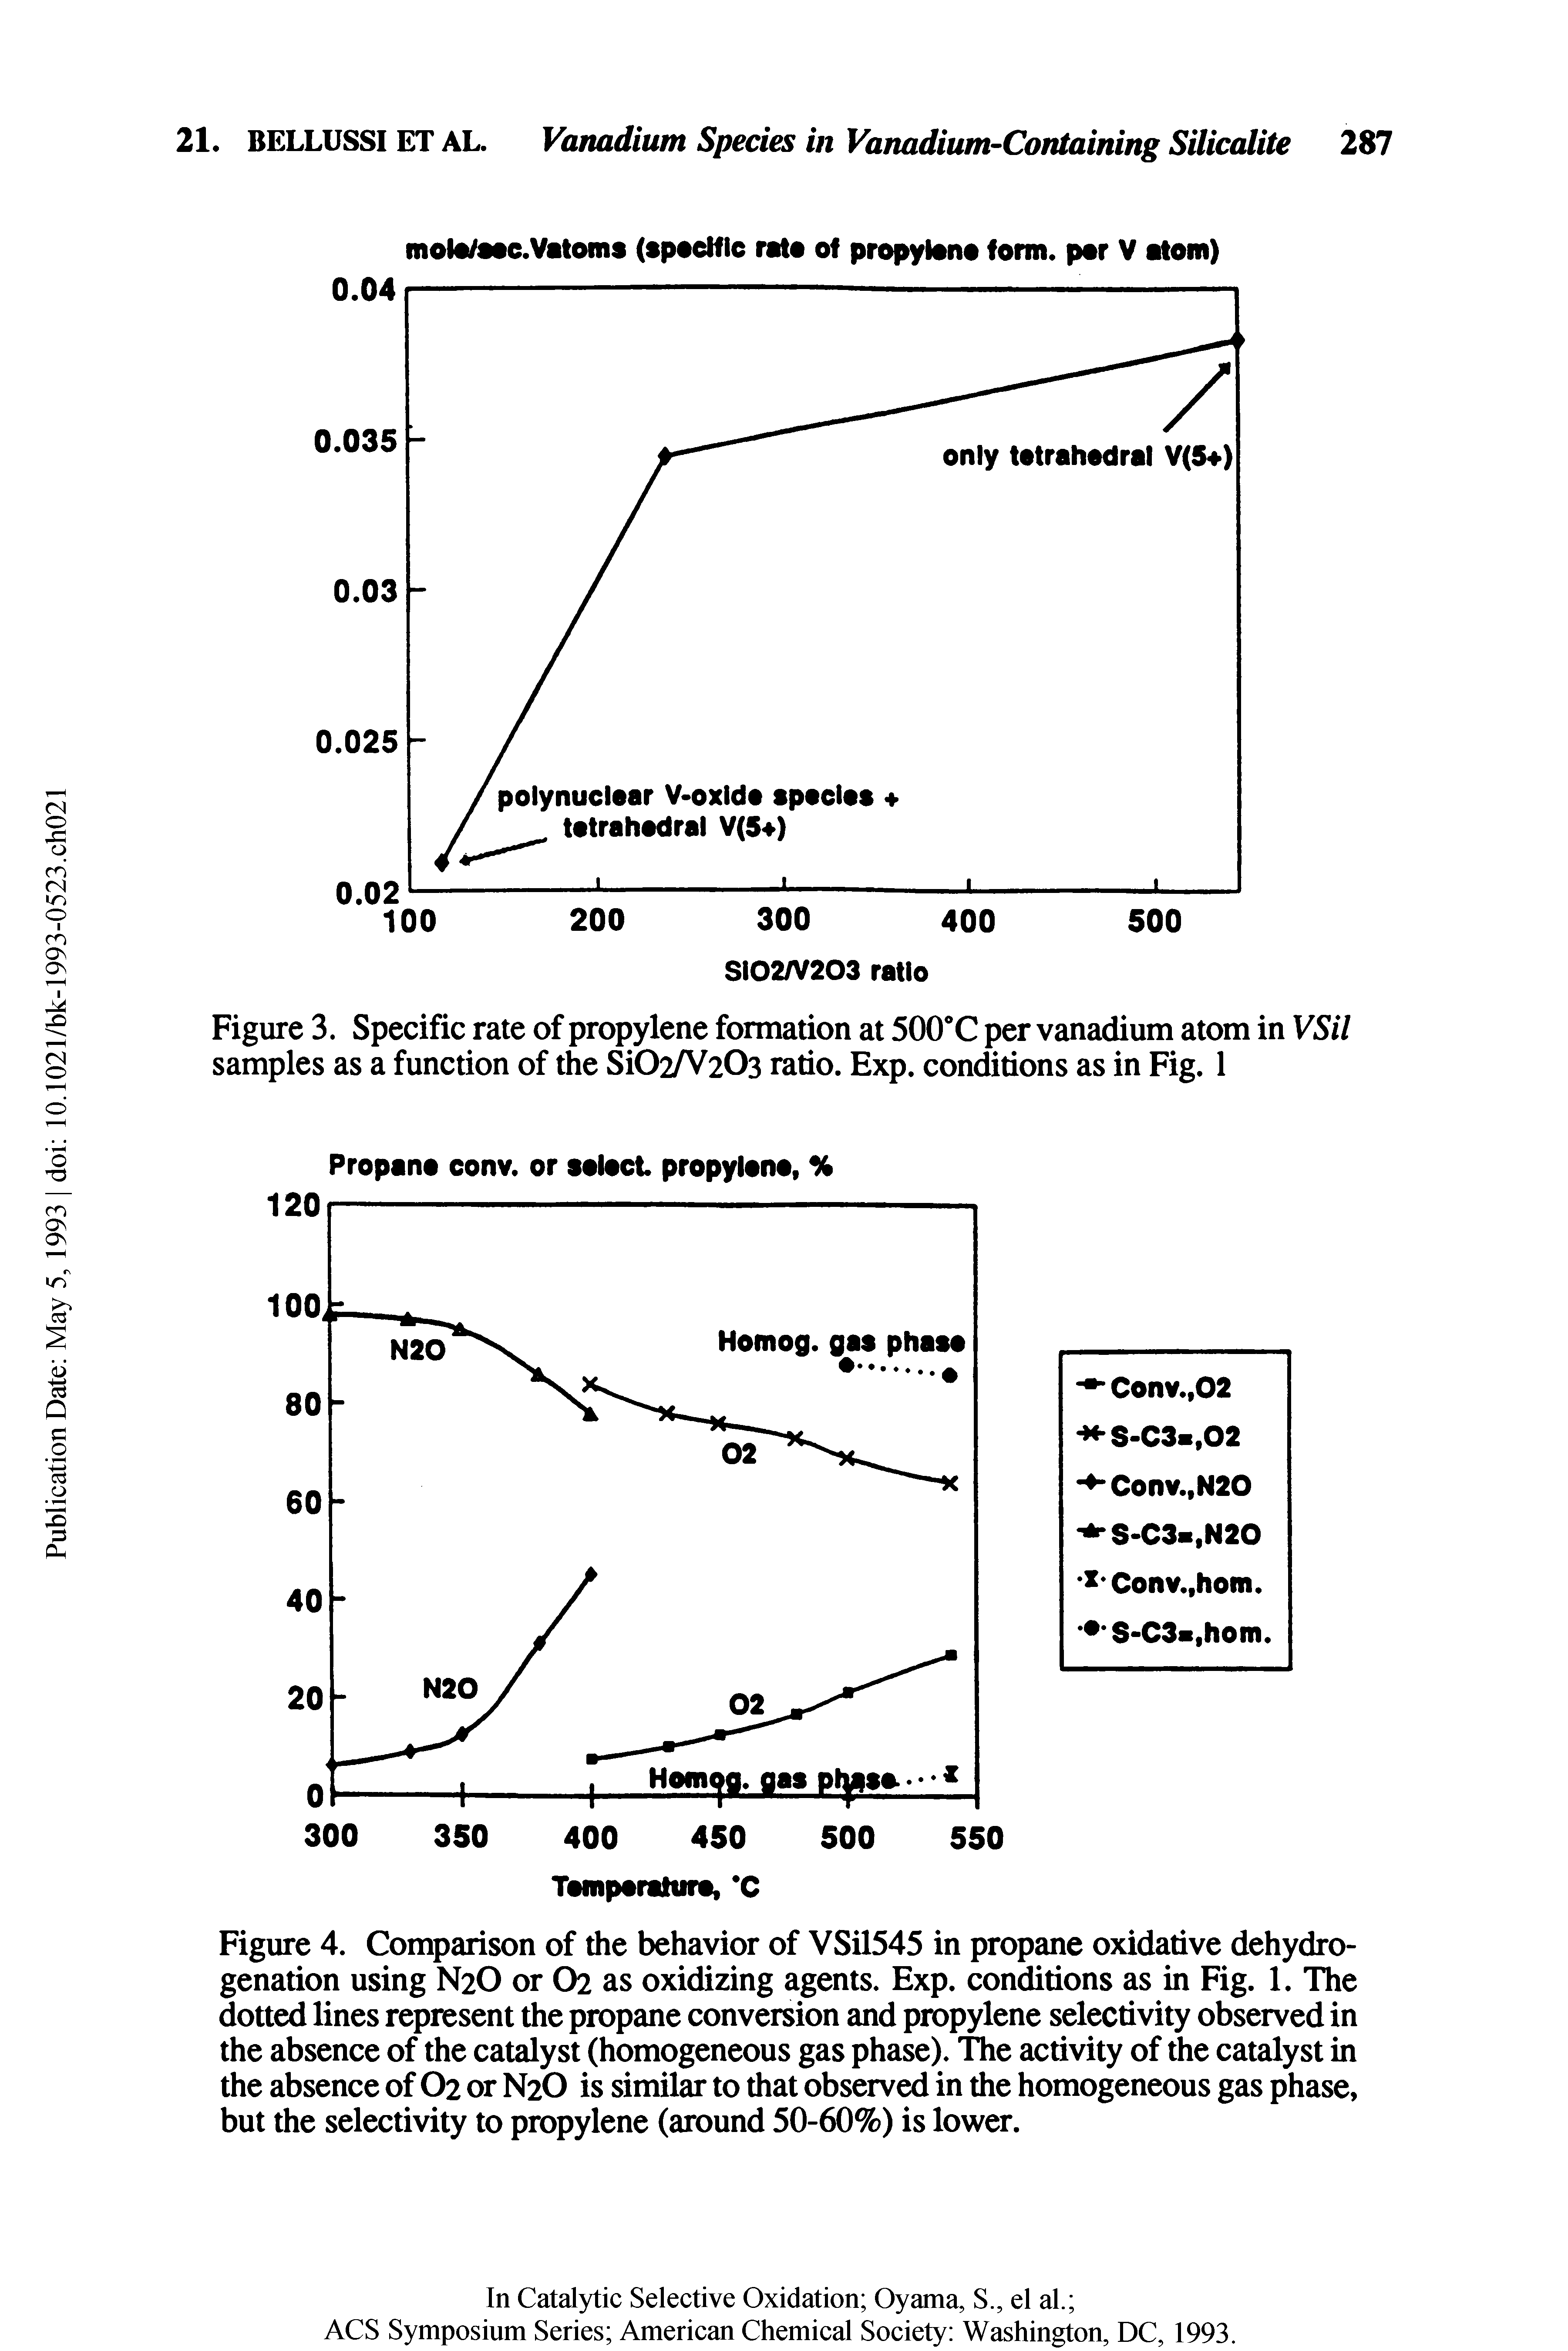 Figure 4. Comparison of the behavior of VSil545 in propane oxidative dehydrogenation using N2O or O2 as oxidizing agents. Exp. conditions as in Fig. 1. The dotted lines represent the propane conversion and propylene selectivity observed in the absence of the catalyst (homogeneous gas phase). The activity of the catalyst in the absence of O2 or N2O is similar to that observed in the homogeneous gas phase, but the selectivity to propylene (around 50-60%) is lower.